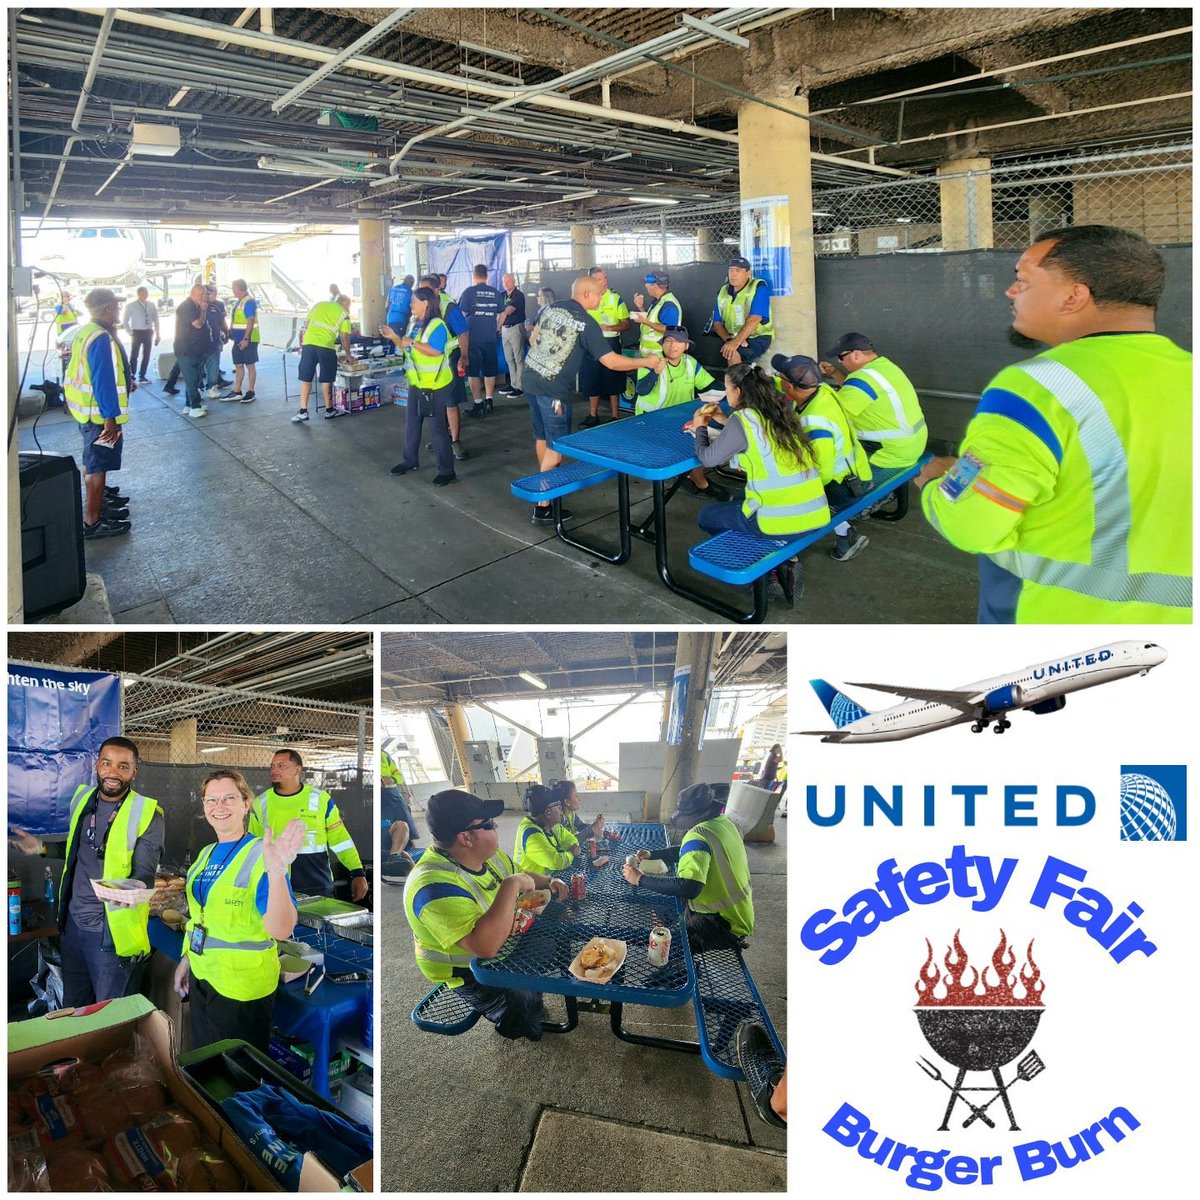 Stop 9 on our BB&SF tour which starts our Florida tour. Great day with our MCO team nice safety event and delicious food. Thanks for a good summer ops. @DJKinzelman @jacquikey @scarnes1978 @united @AOSafetyUAL @SteveTanzella